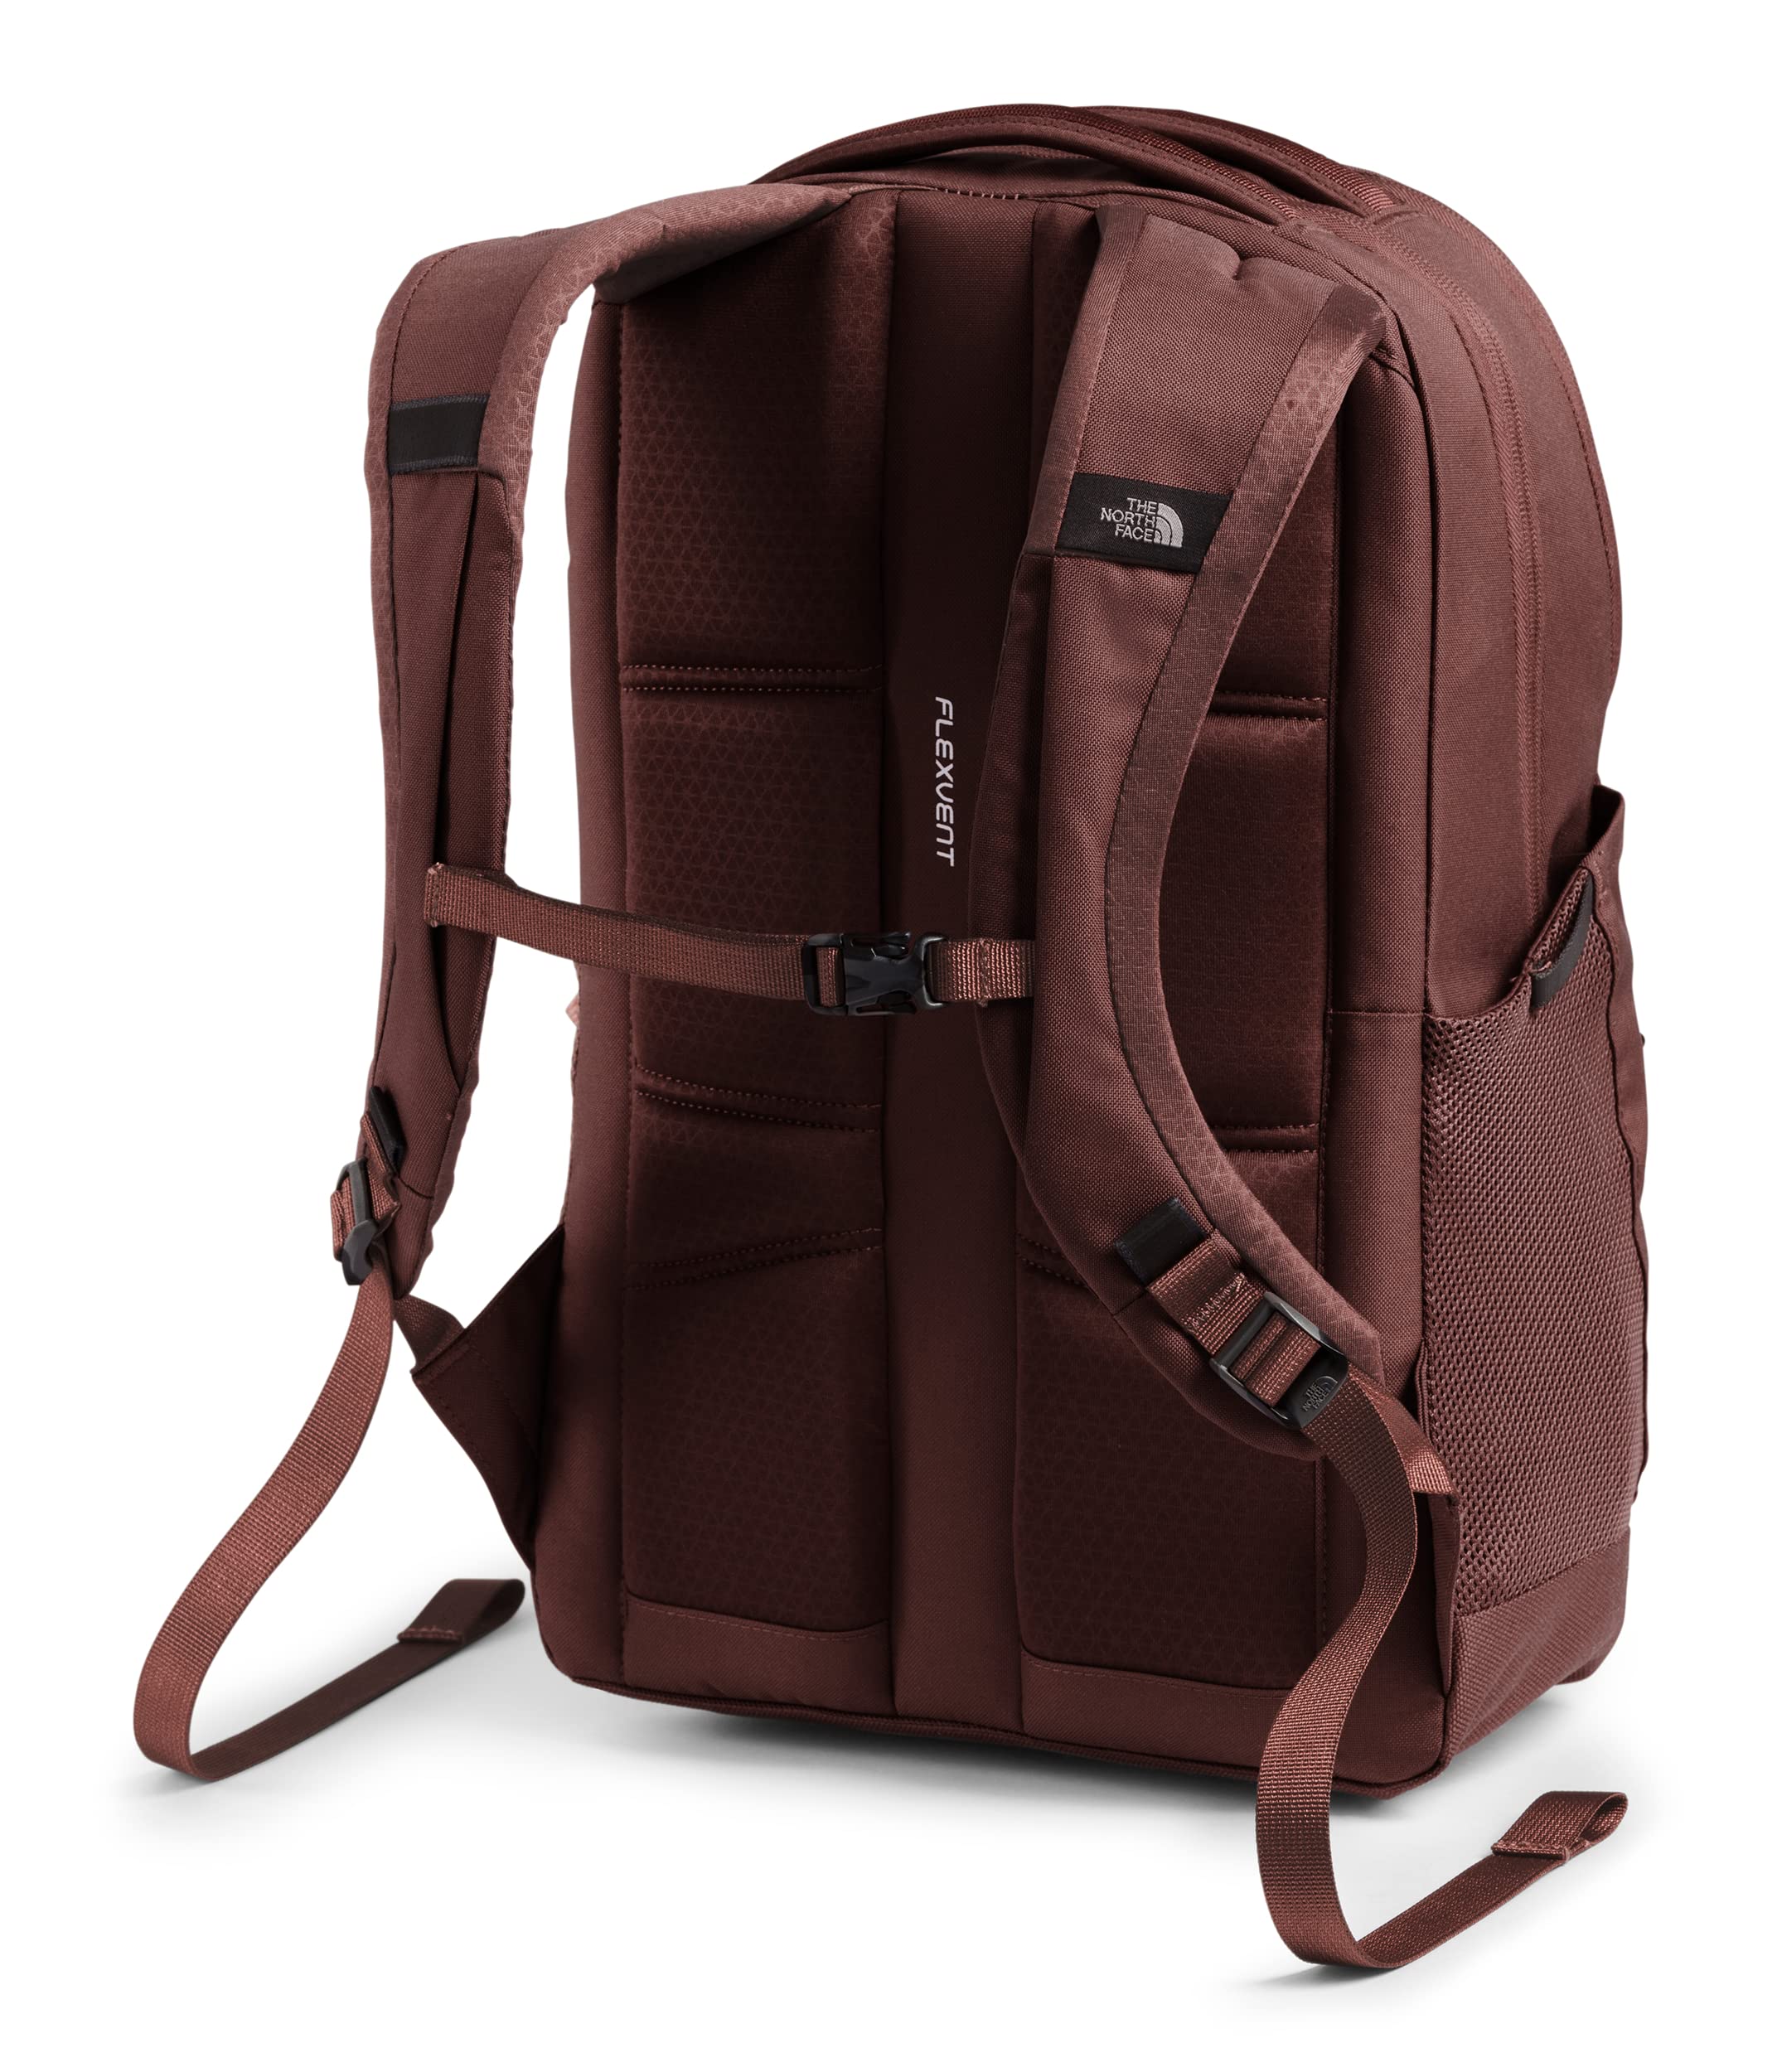 THE NORTH FACE Women's Every Day Jester Laptop Backpack